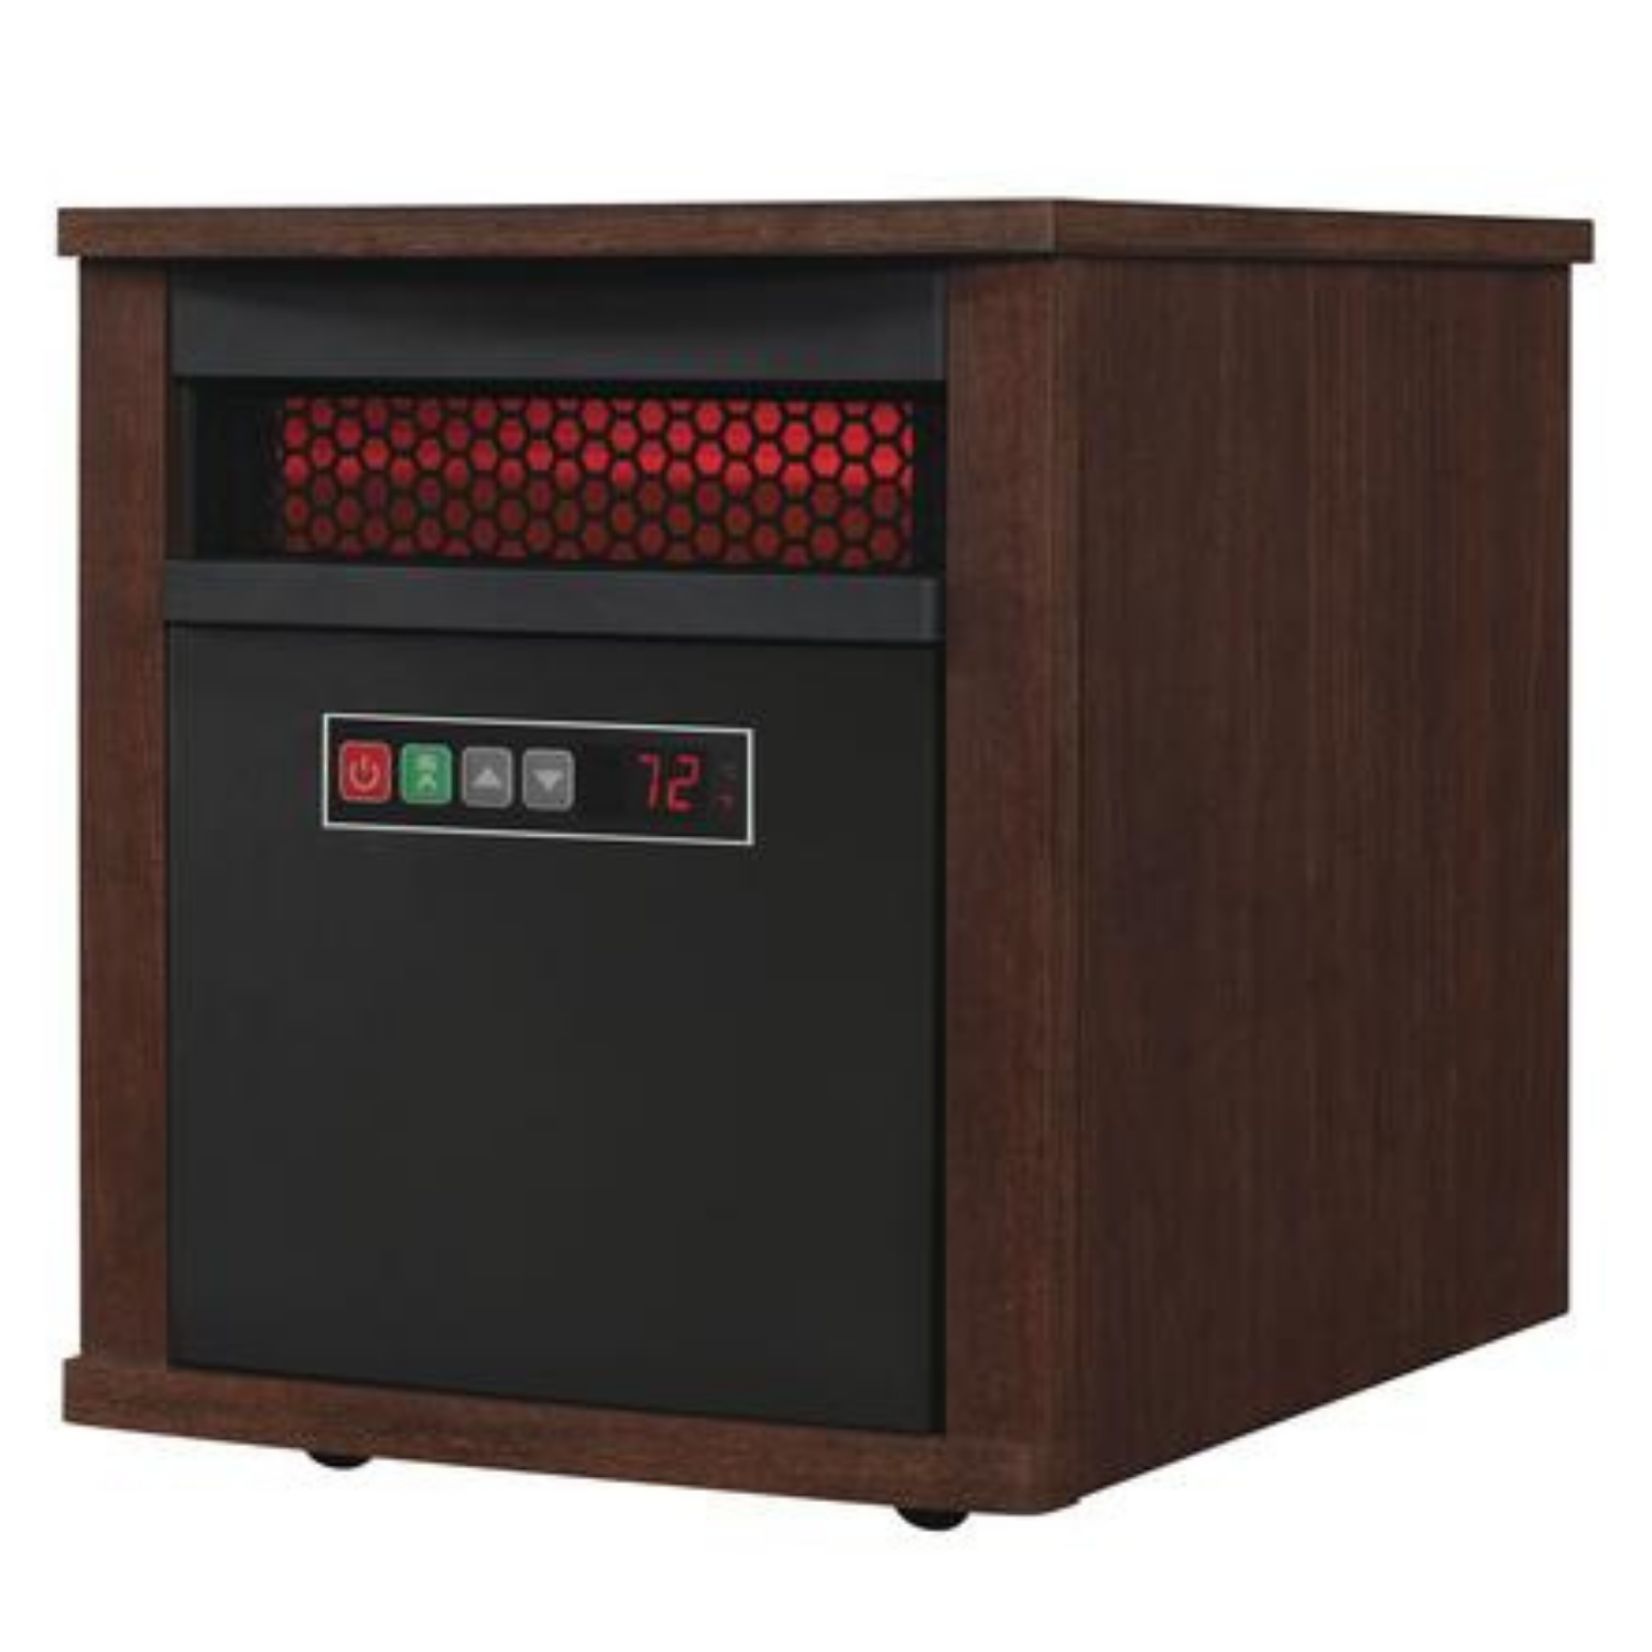 Twin Star Infrared Quartz Heater with Safety Plug